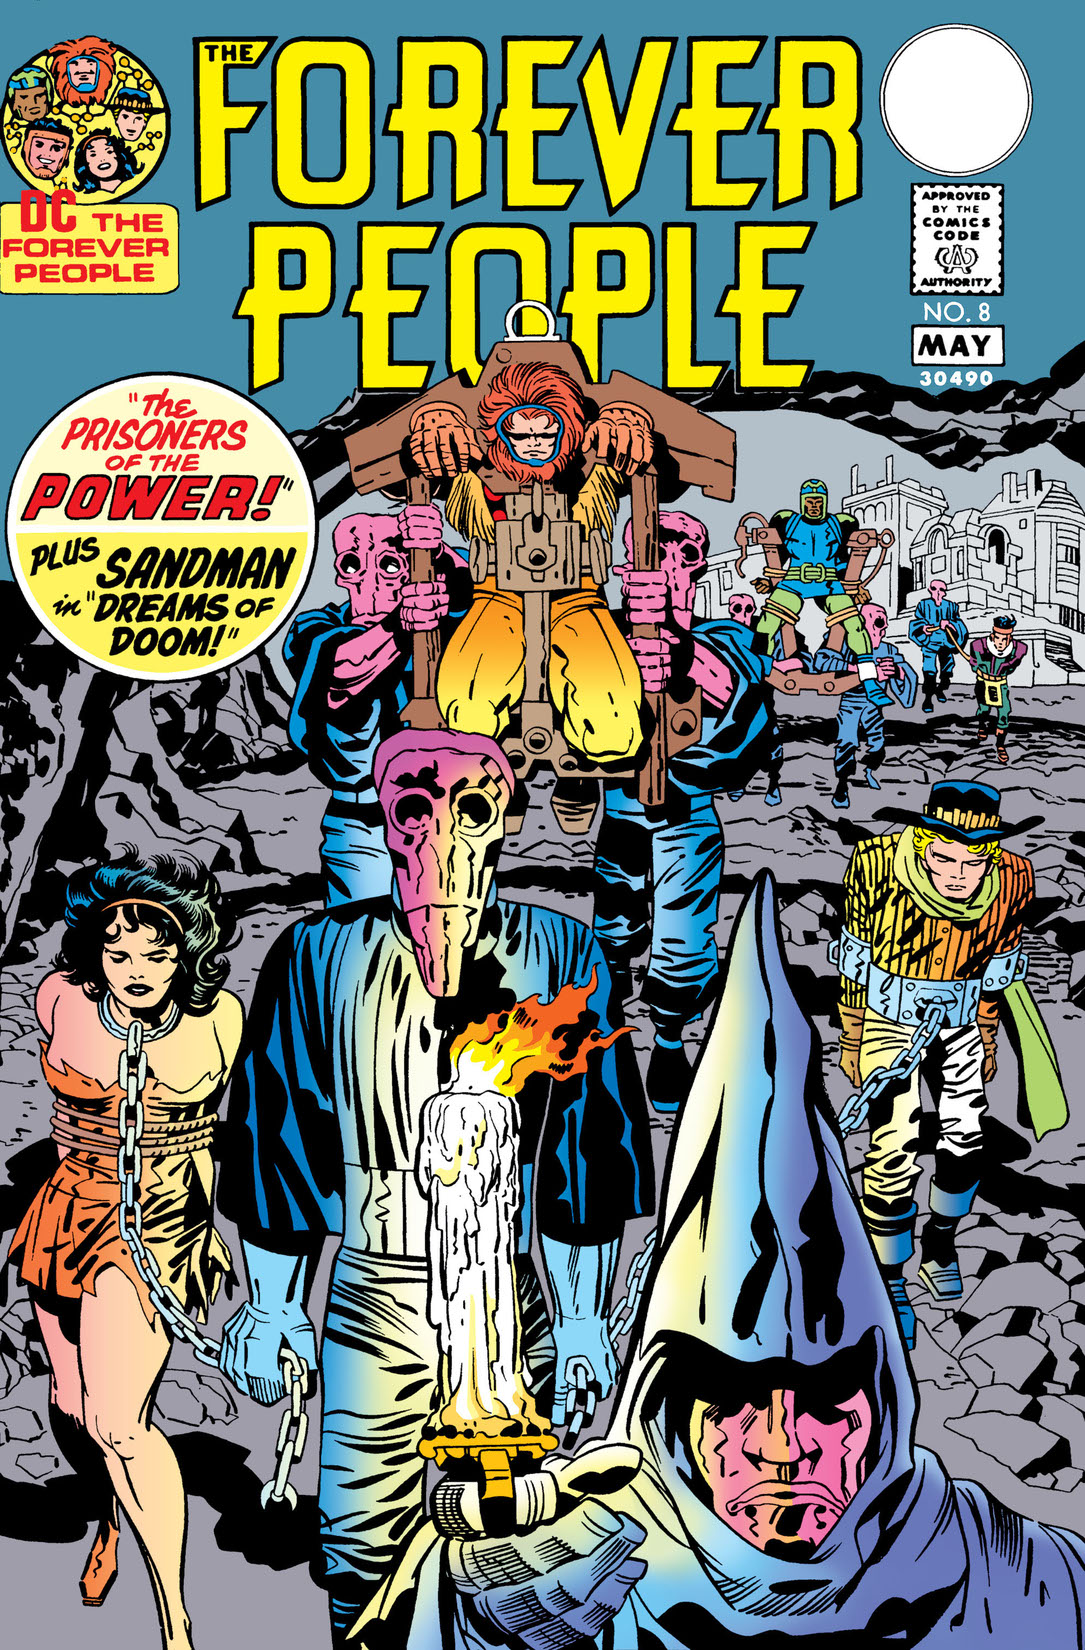 The Forever People #8 preview images